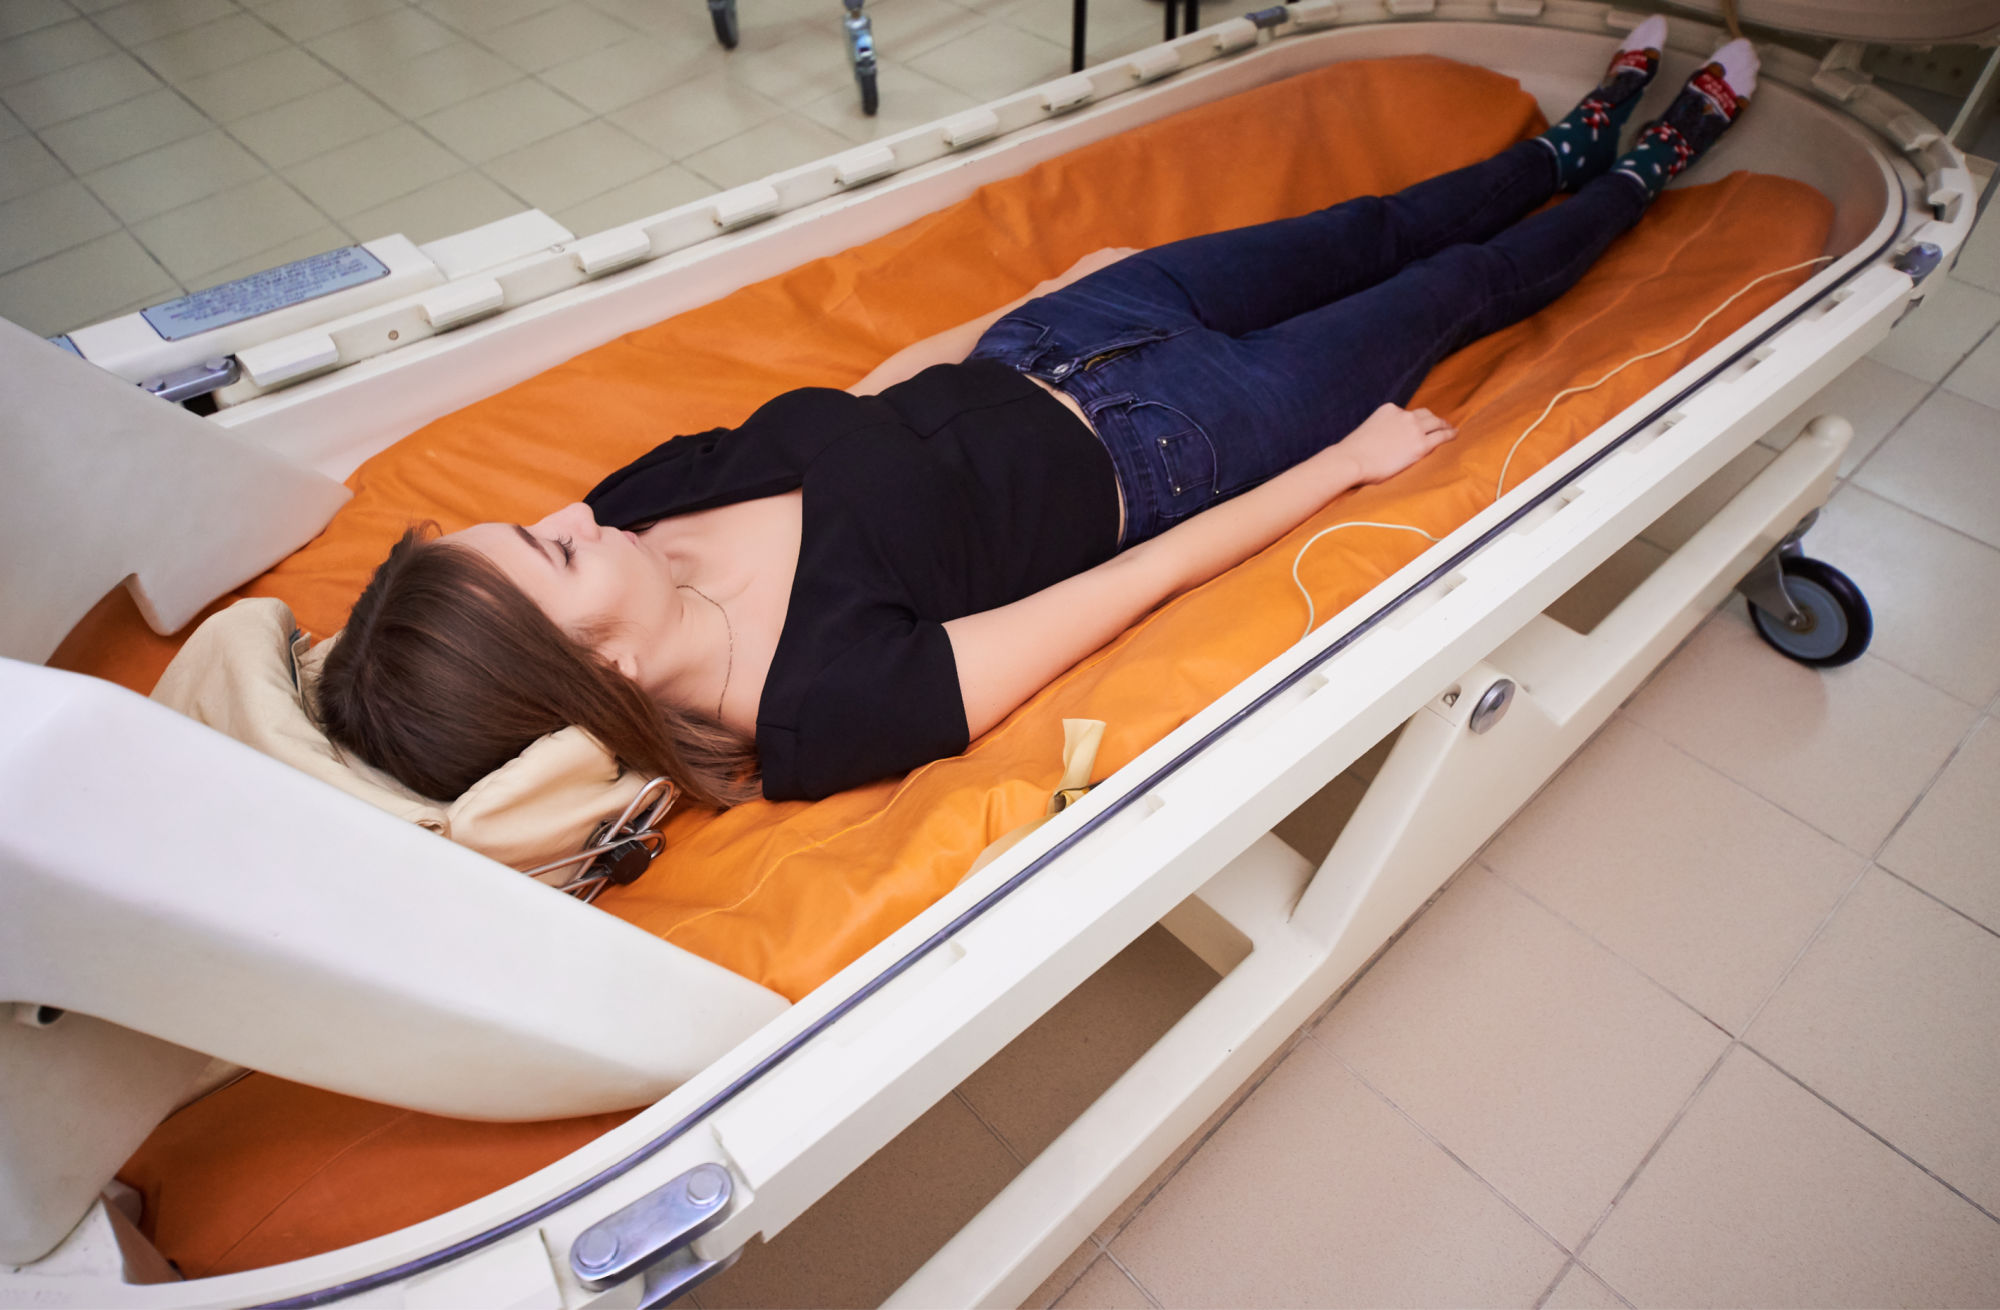 Hyperbaric Oxygen Therapy (HBOT)